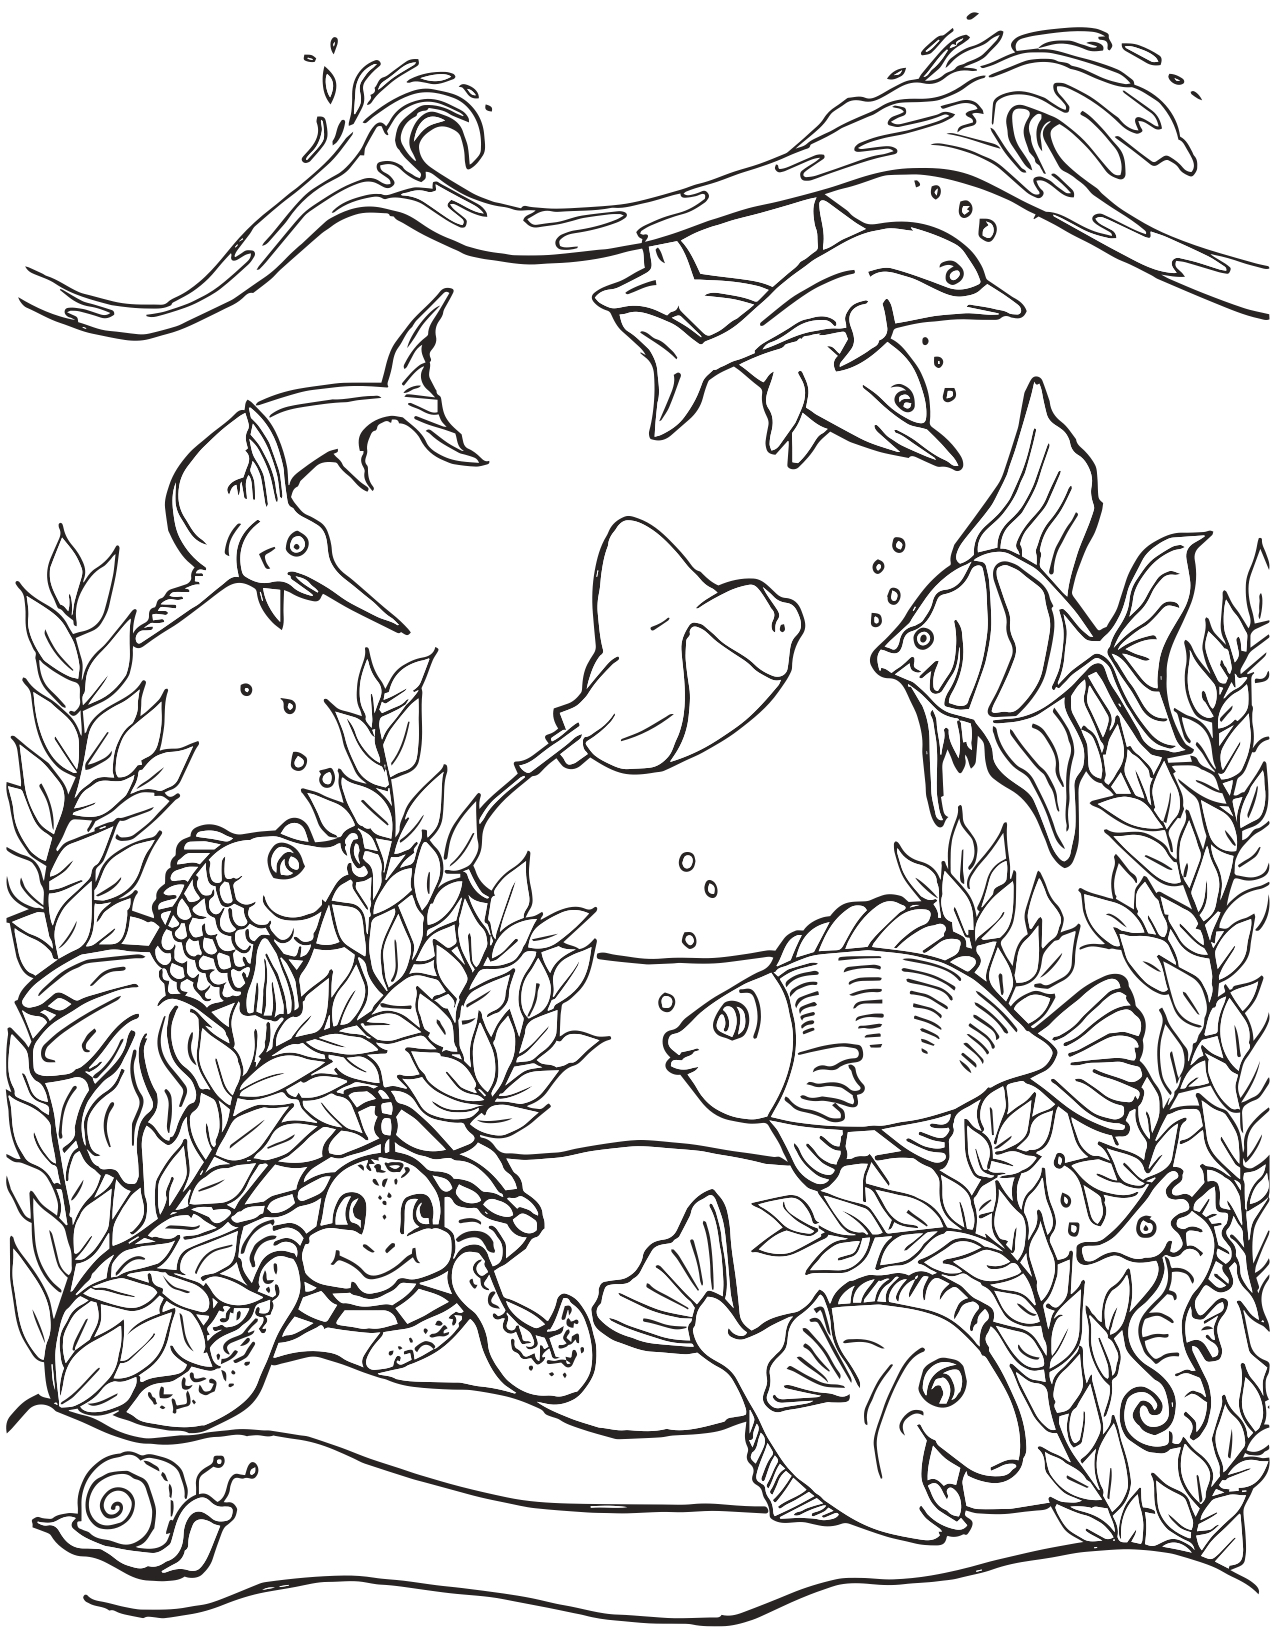 life-under-the-sea-coloring-page-mermaid-coloring-pages